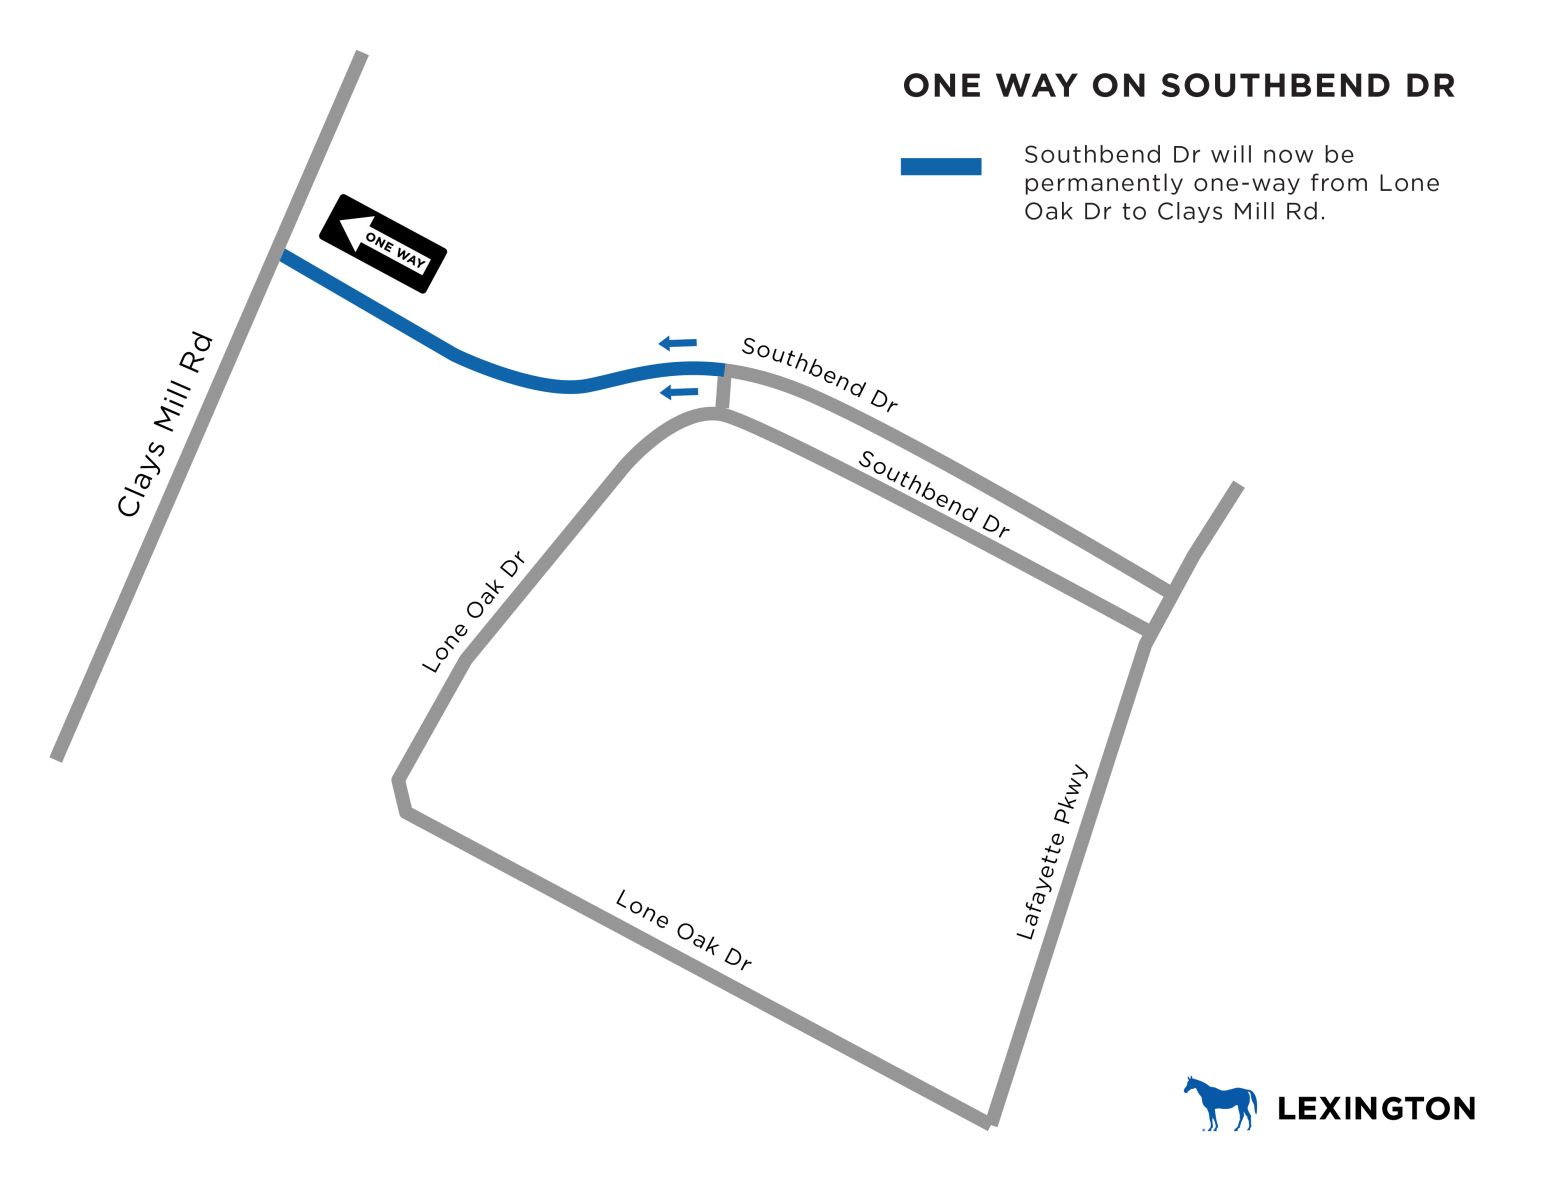 line drawing showing Southbend Drive as one way from Lone Oak Drive to Clays Mill Road